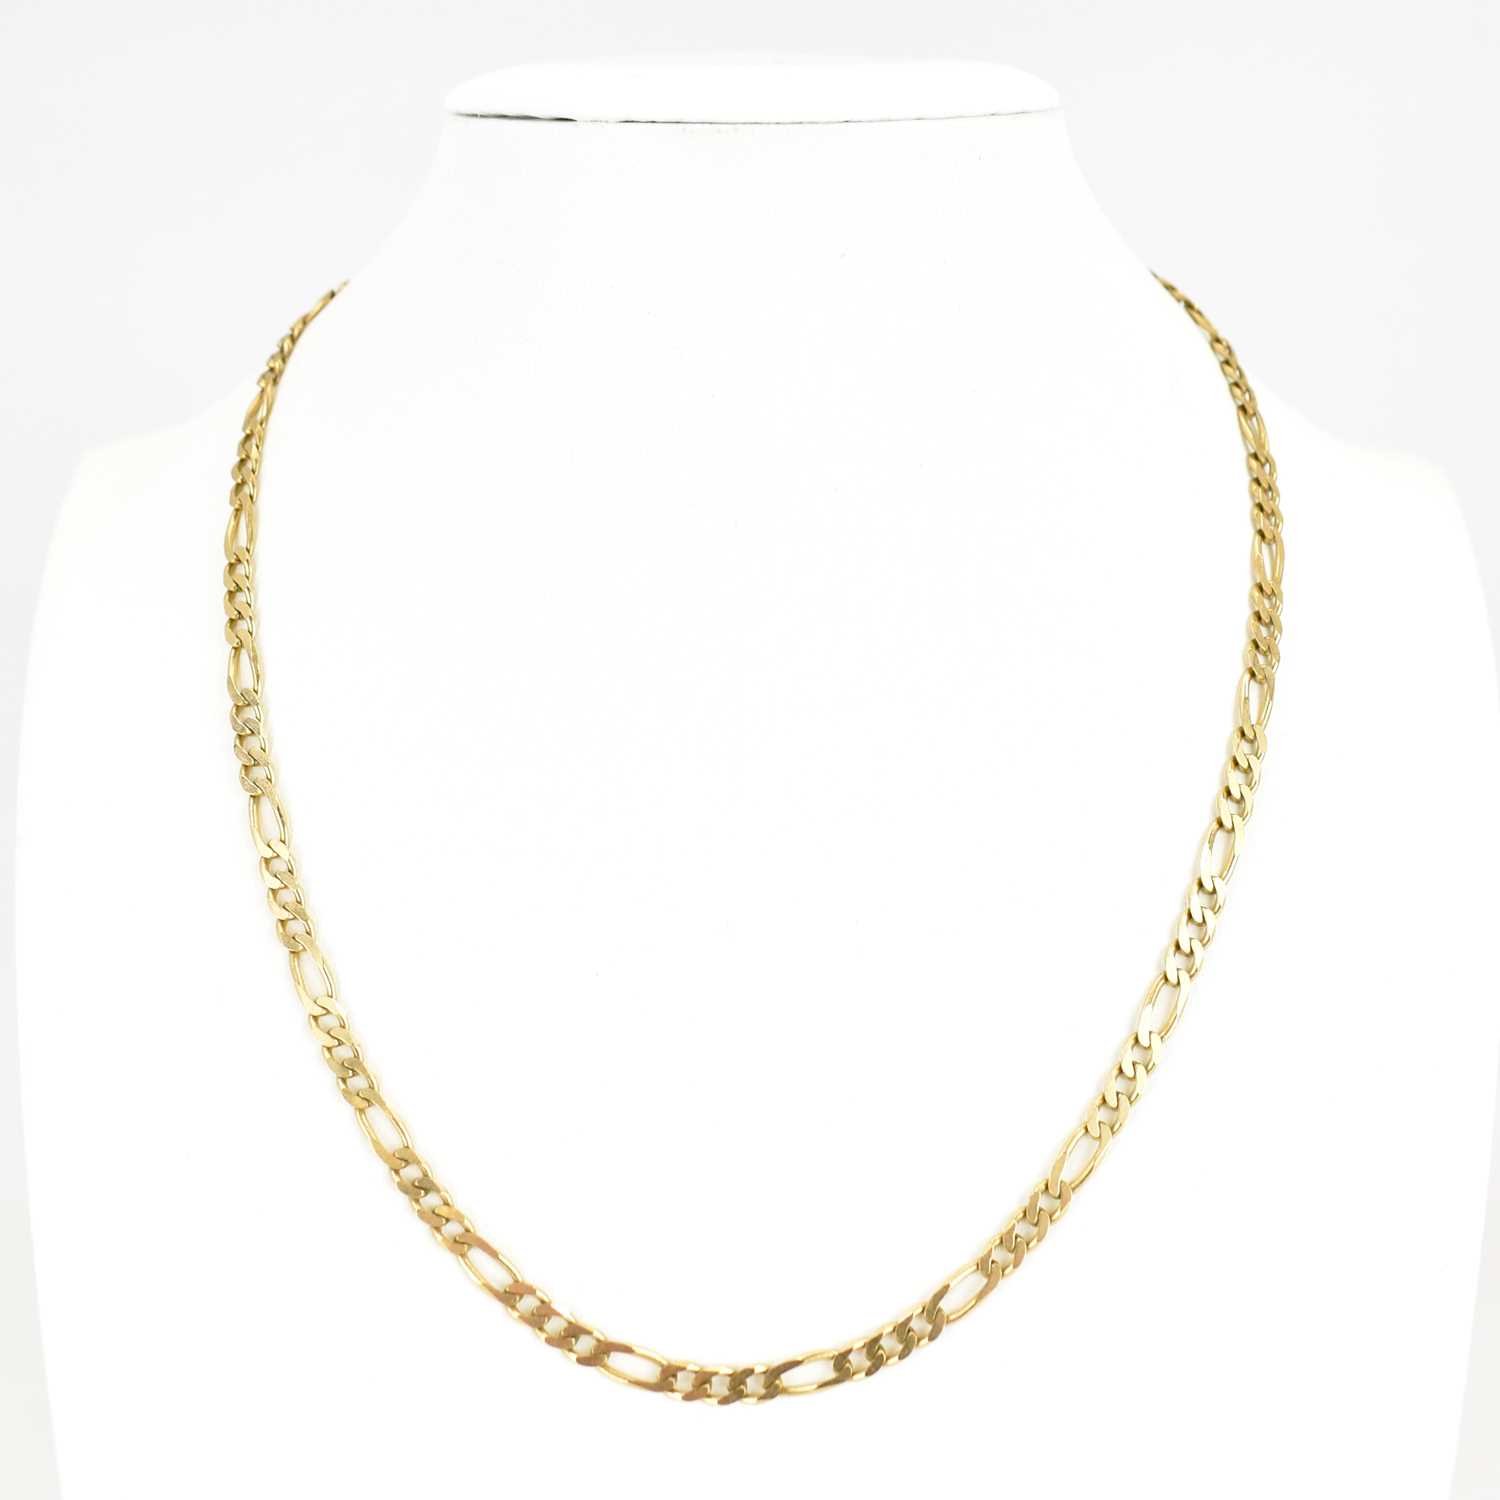 A 9ct gold figaro link necklace with lobster claw clasp, length 39cm, approx. 8.5g.